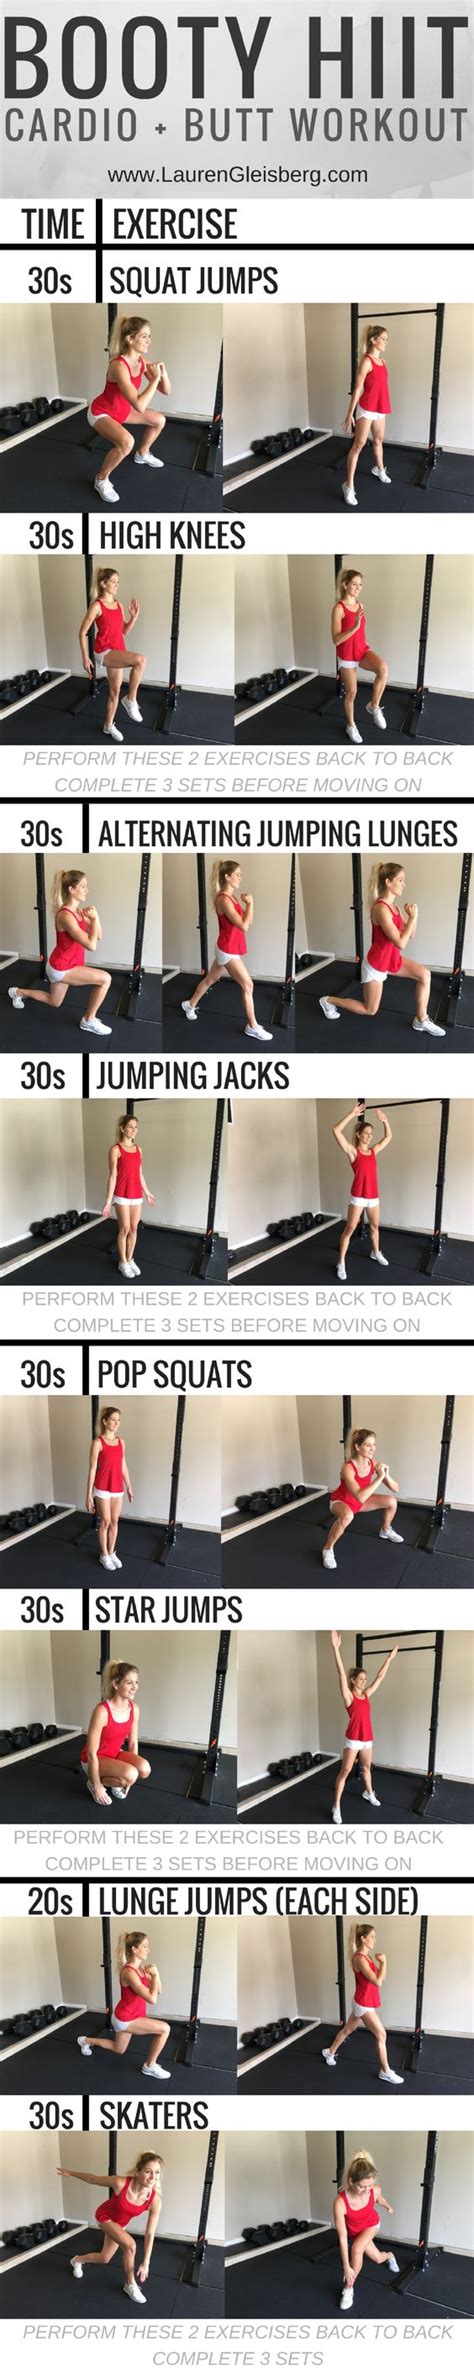 27 Hourglass Body Workouts That Will Give You An Amazing Fit Body Trimmedandtoned